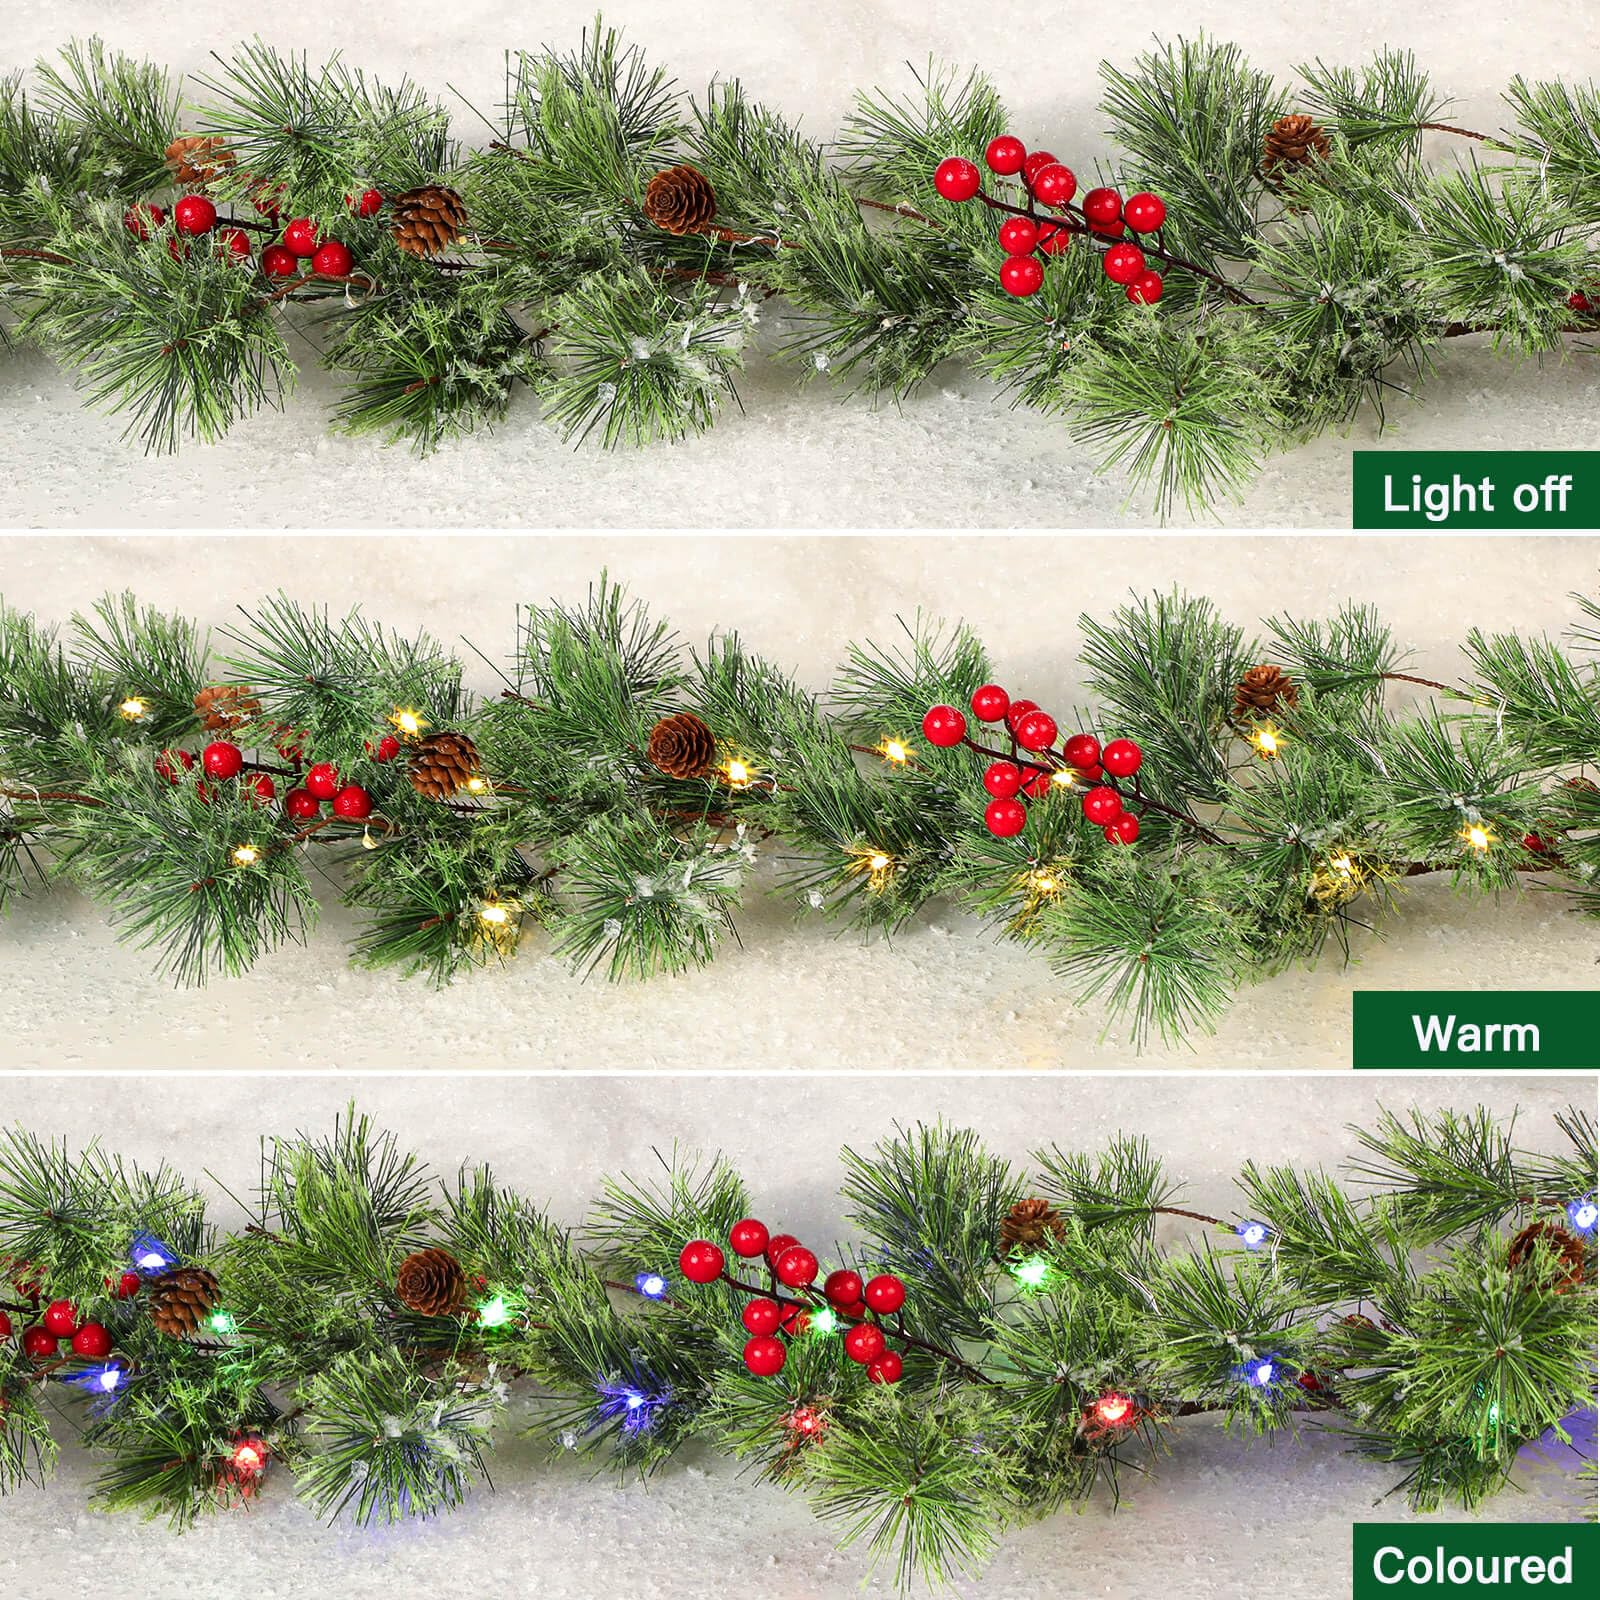 9FT Prelit Artificial Christmas Garland with Multi-Color Changing Lights/Remote/Battery